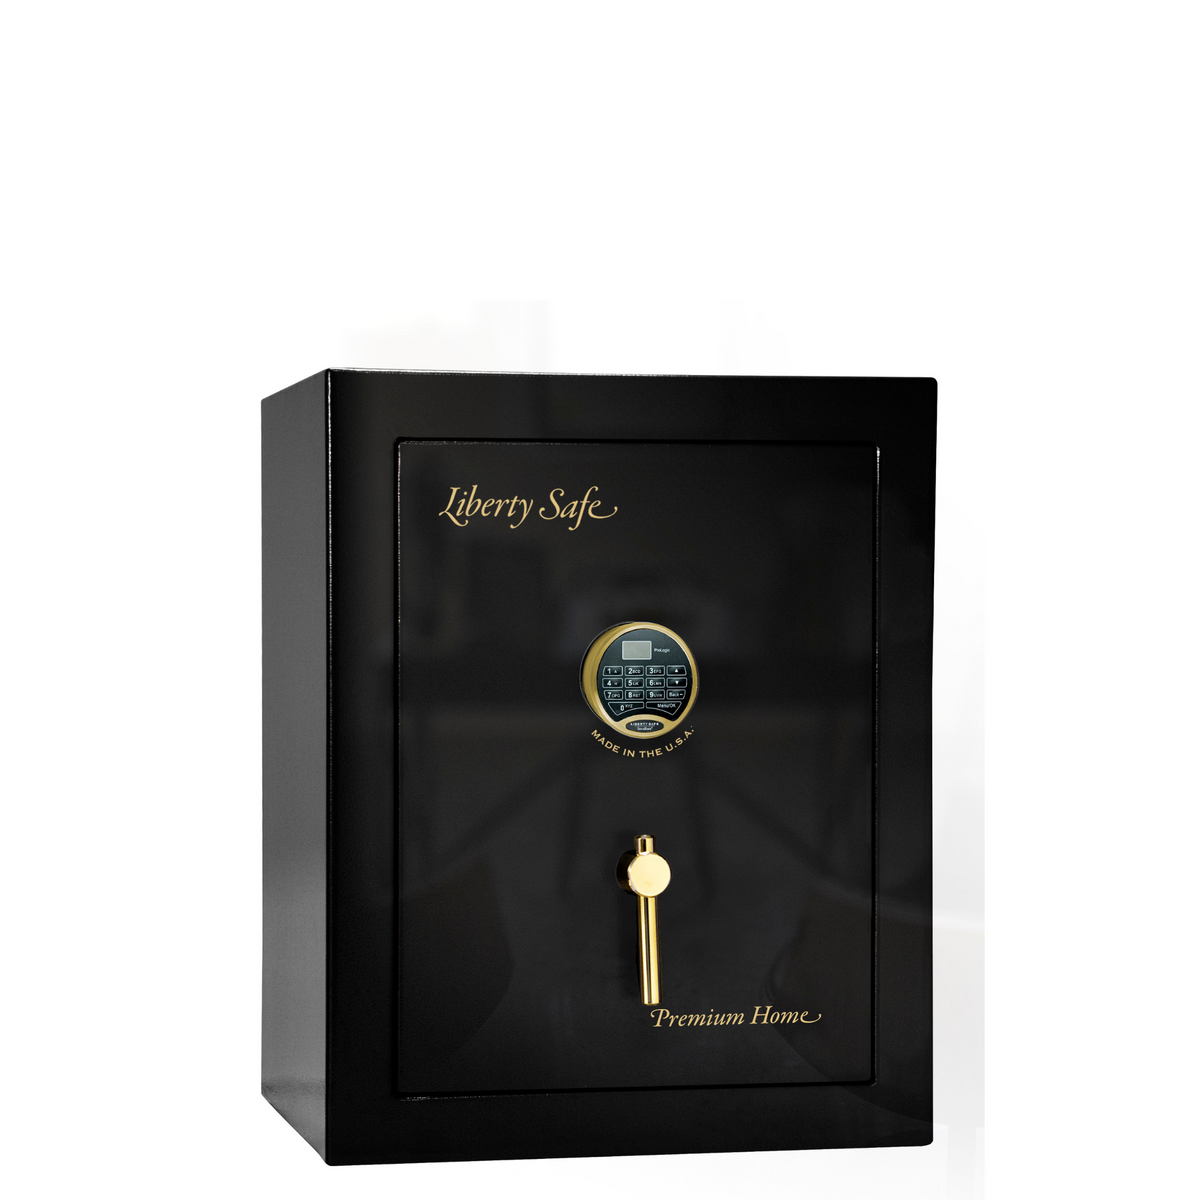 Premium Home Series | Level 7 Security | 2 Hour Fire Protection | 08 | Dimensions: 30&quot;(H) x 24&quot;(W) x 20.25&quot;(D) | Black Gloss Brass - Closed Door